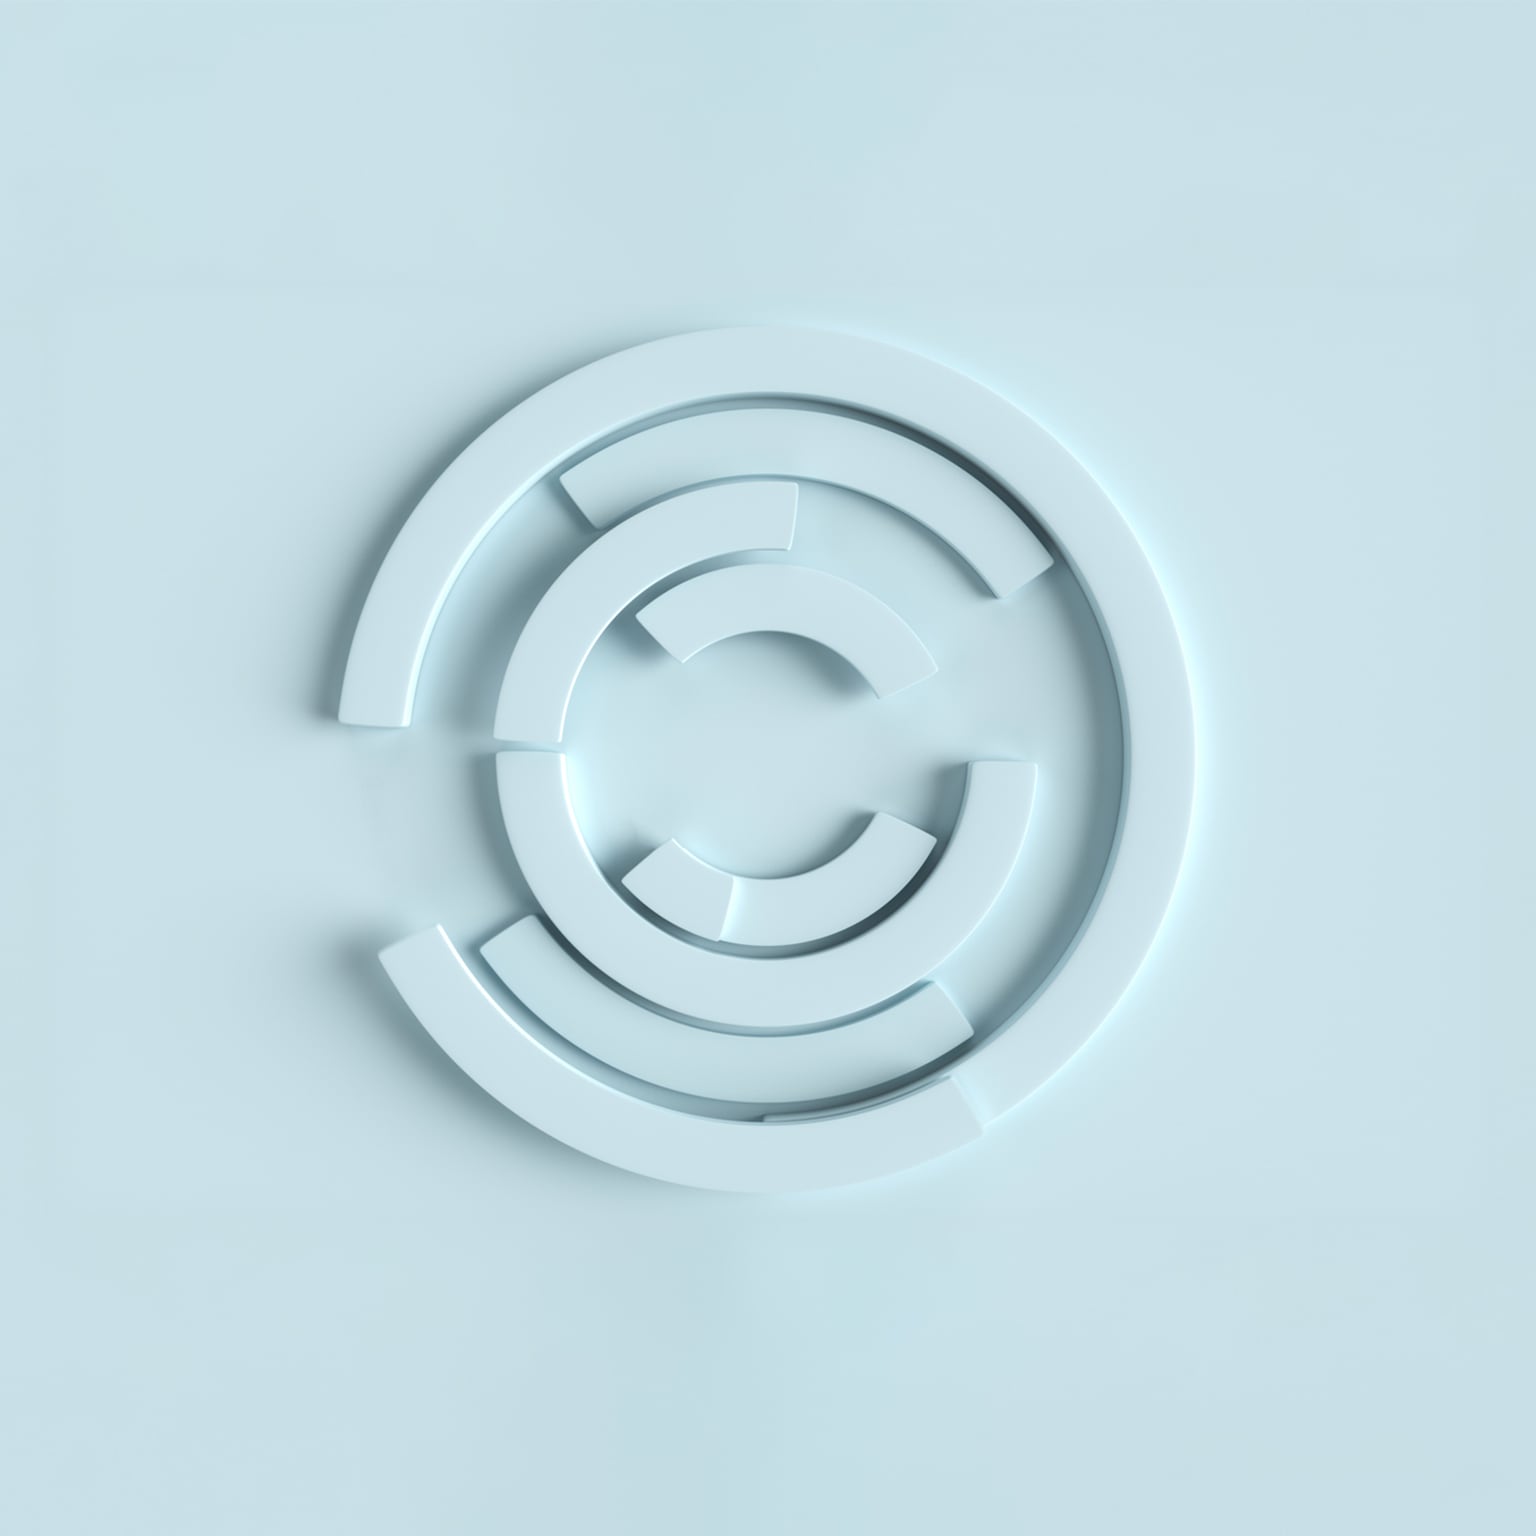 Circular, white maze filled with white semicircles.